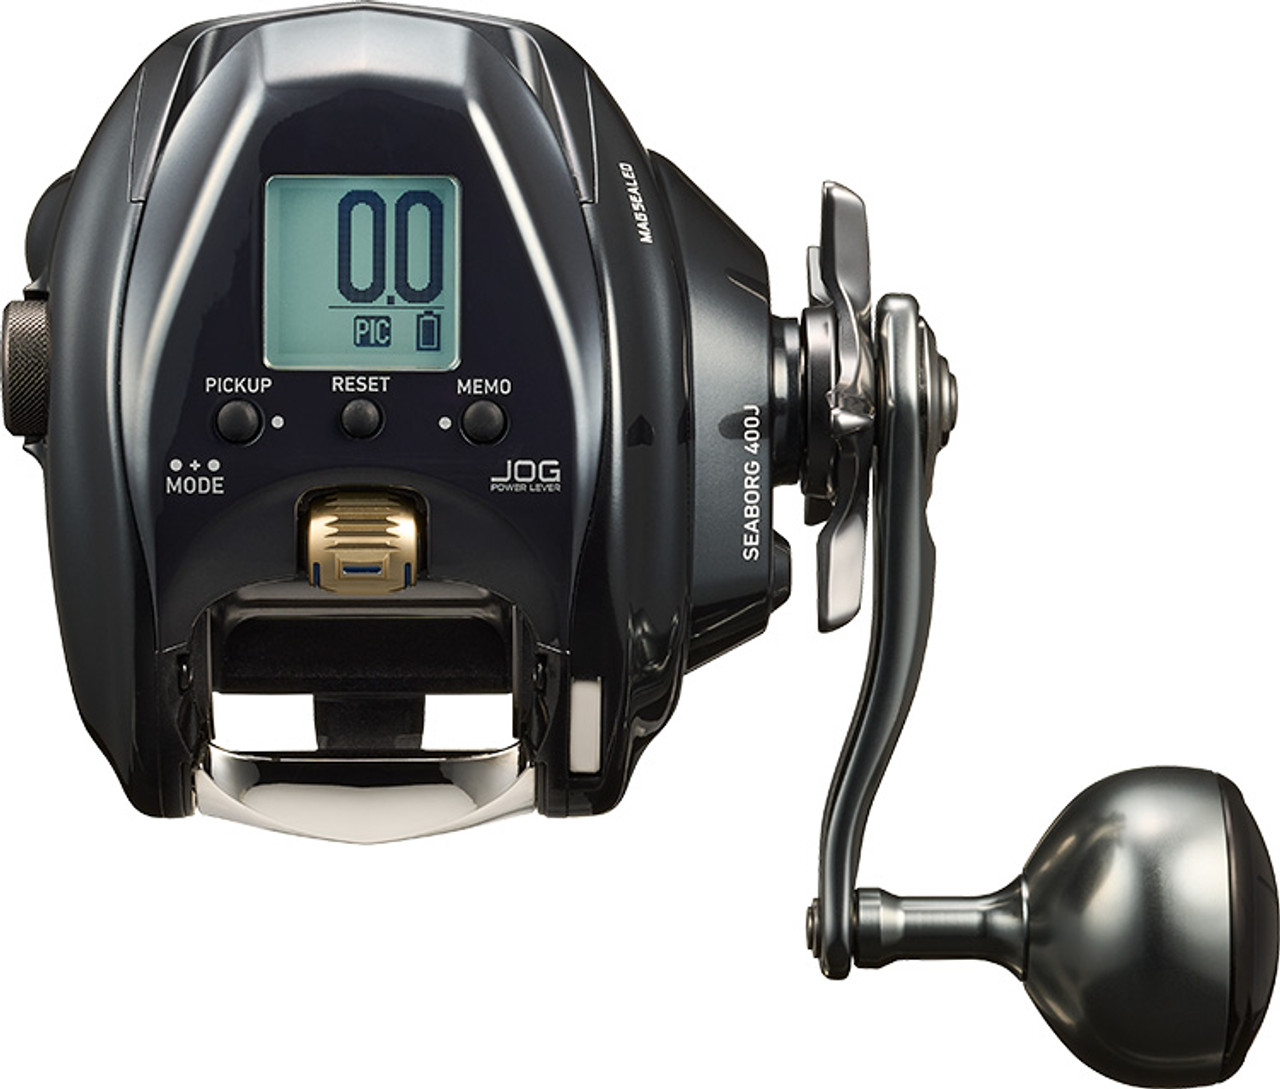 The SEABORG400J is a lightweight and compact electric reel designed to provide power and speed for comfortable fishing. It weighs 585g, which is 240g lighter than the SEABORG500JP, making it suitable for fishing that was traditionally done with a larger 500 size reel but with the convenience and handling of a 300 size reel. The SEABORG400J is capable of handling various types of fish, including spears, dried squids, red sea bream, blue-skinned fish, and mid-deep sea species.

The reel incorporates advanced technologies to enhance performance and functionality. It features a one-hand comfortable operation JOG power lever made of aluminum, allowing delicate operation even with wet fingers. The MAGMAX motor provides torque and instantaneous power equivalent to a 500 size reel, with a JAFS standard hoisting force of 14kg and maximum drag force of 16kg through the ATD (automatic drag system).